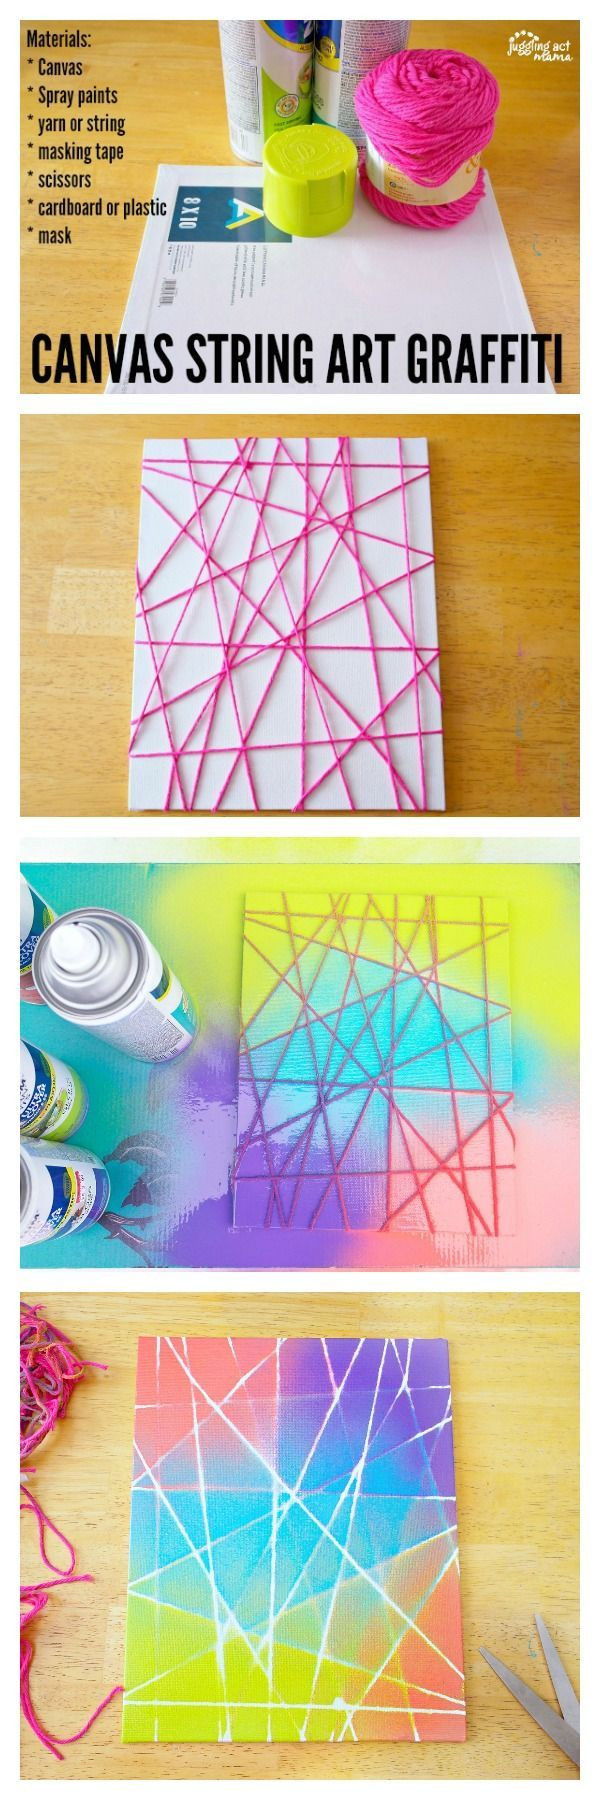 Fun Craft Projects For Adults
 Best 20 Diy And Crafts ideas on Pinterest